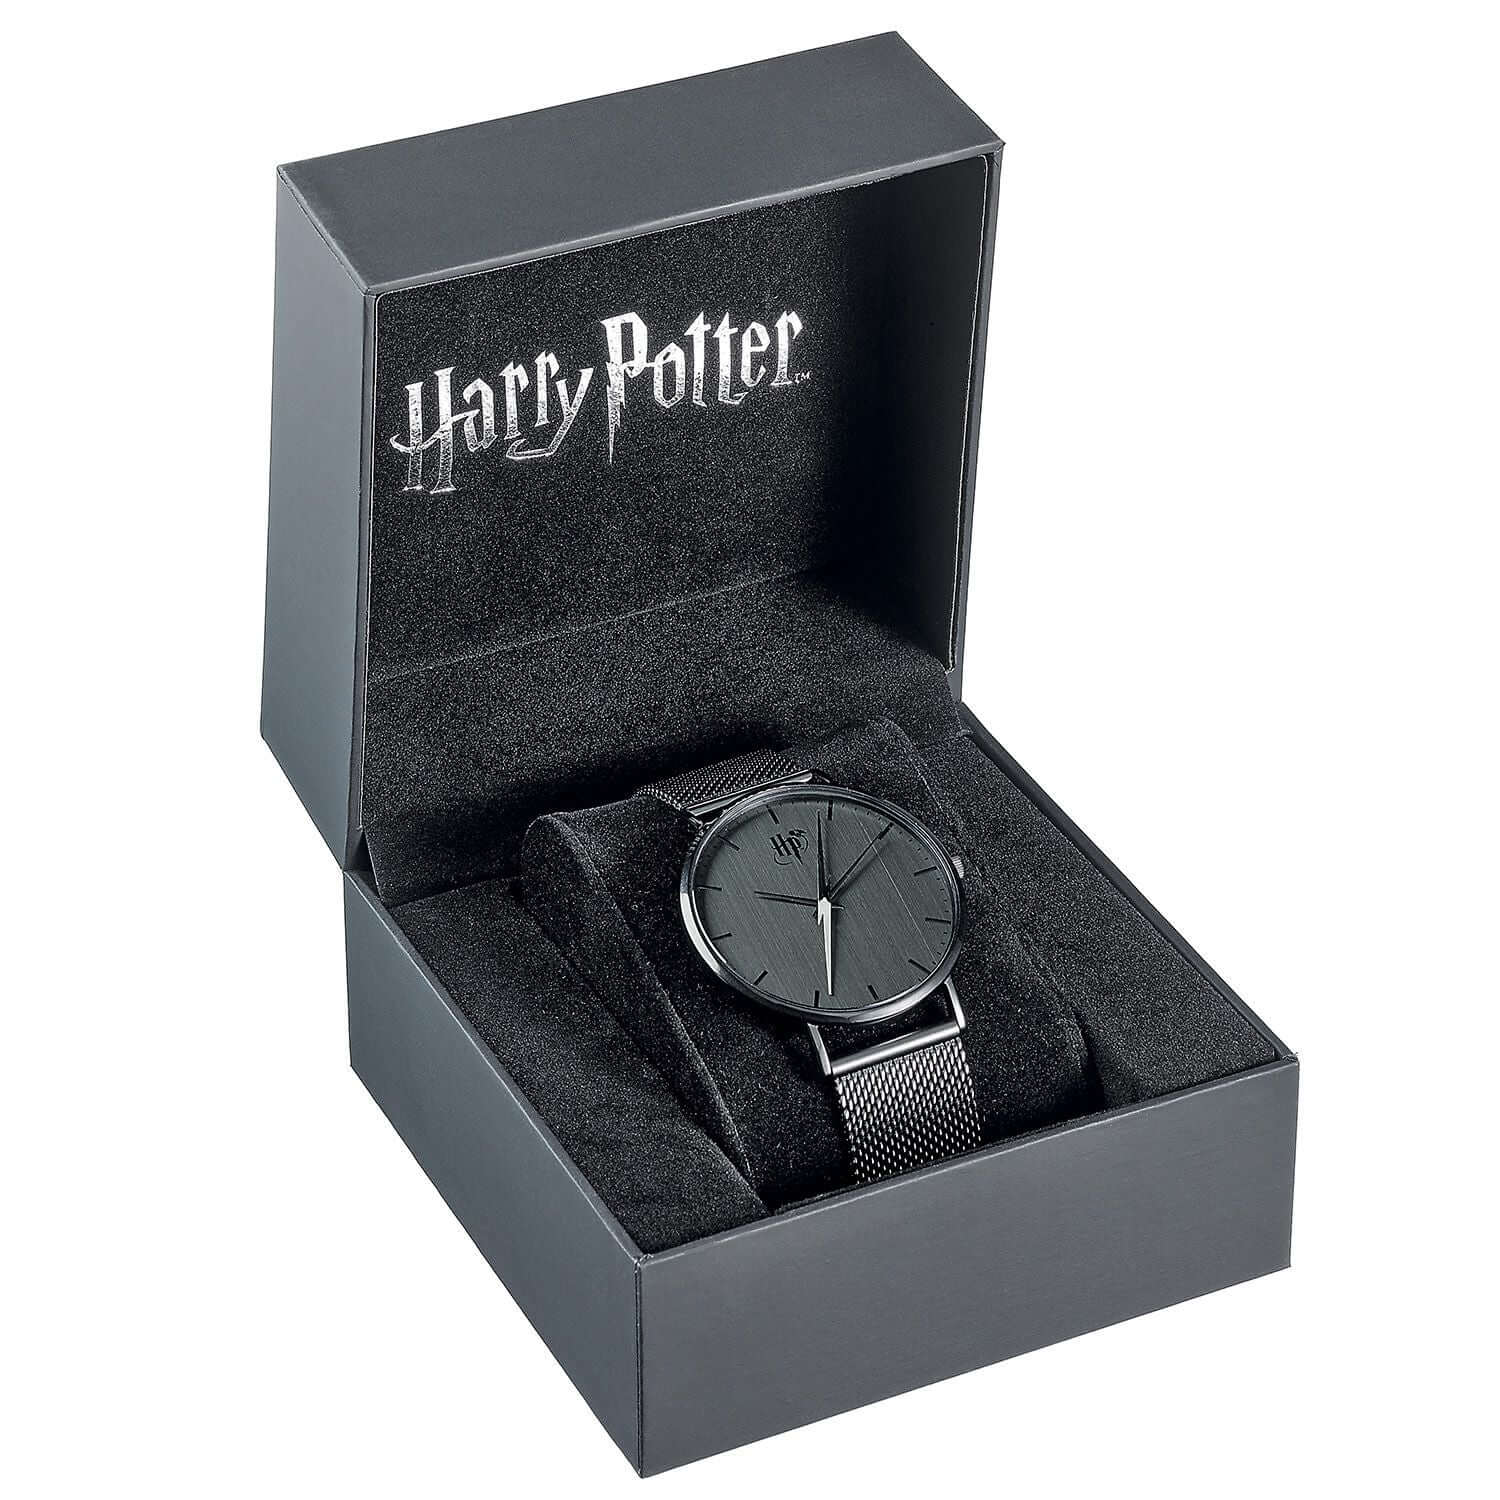 Lightning Bolt Watch  Harry Potter gifts from House of Spells